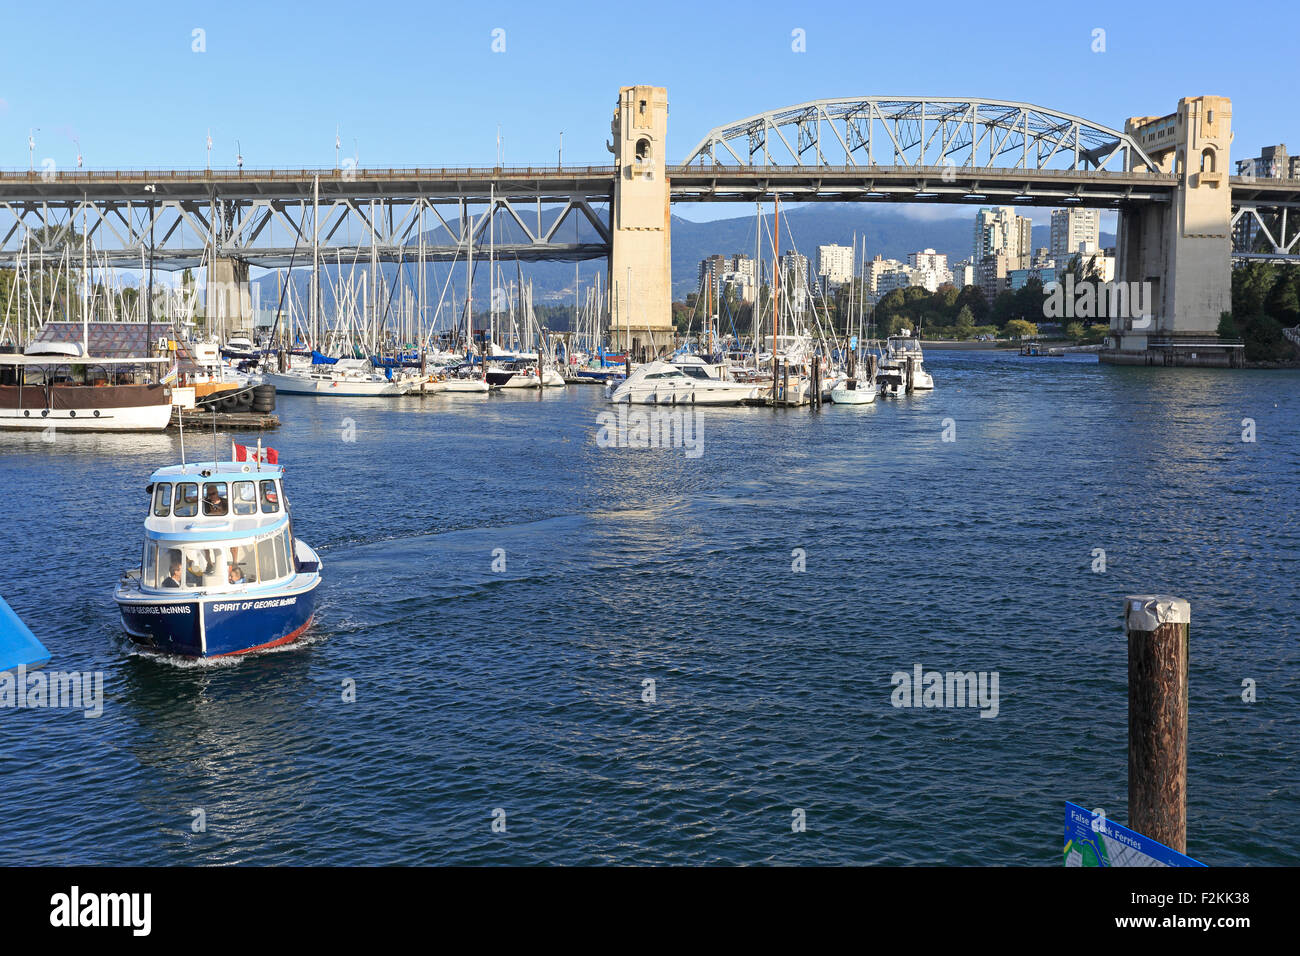 Burrard Street Bridge in Vancouver Canada from Granville Island with a water bus in the foreground Stock Photo